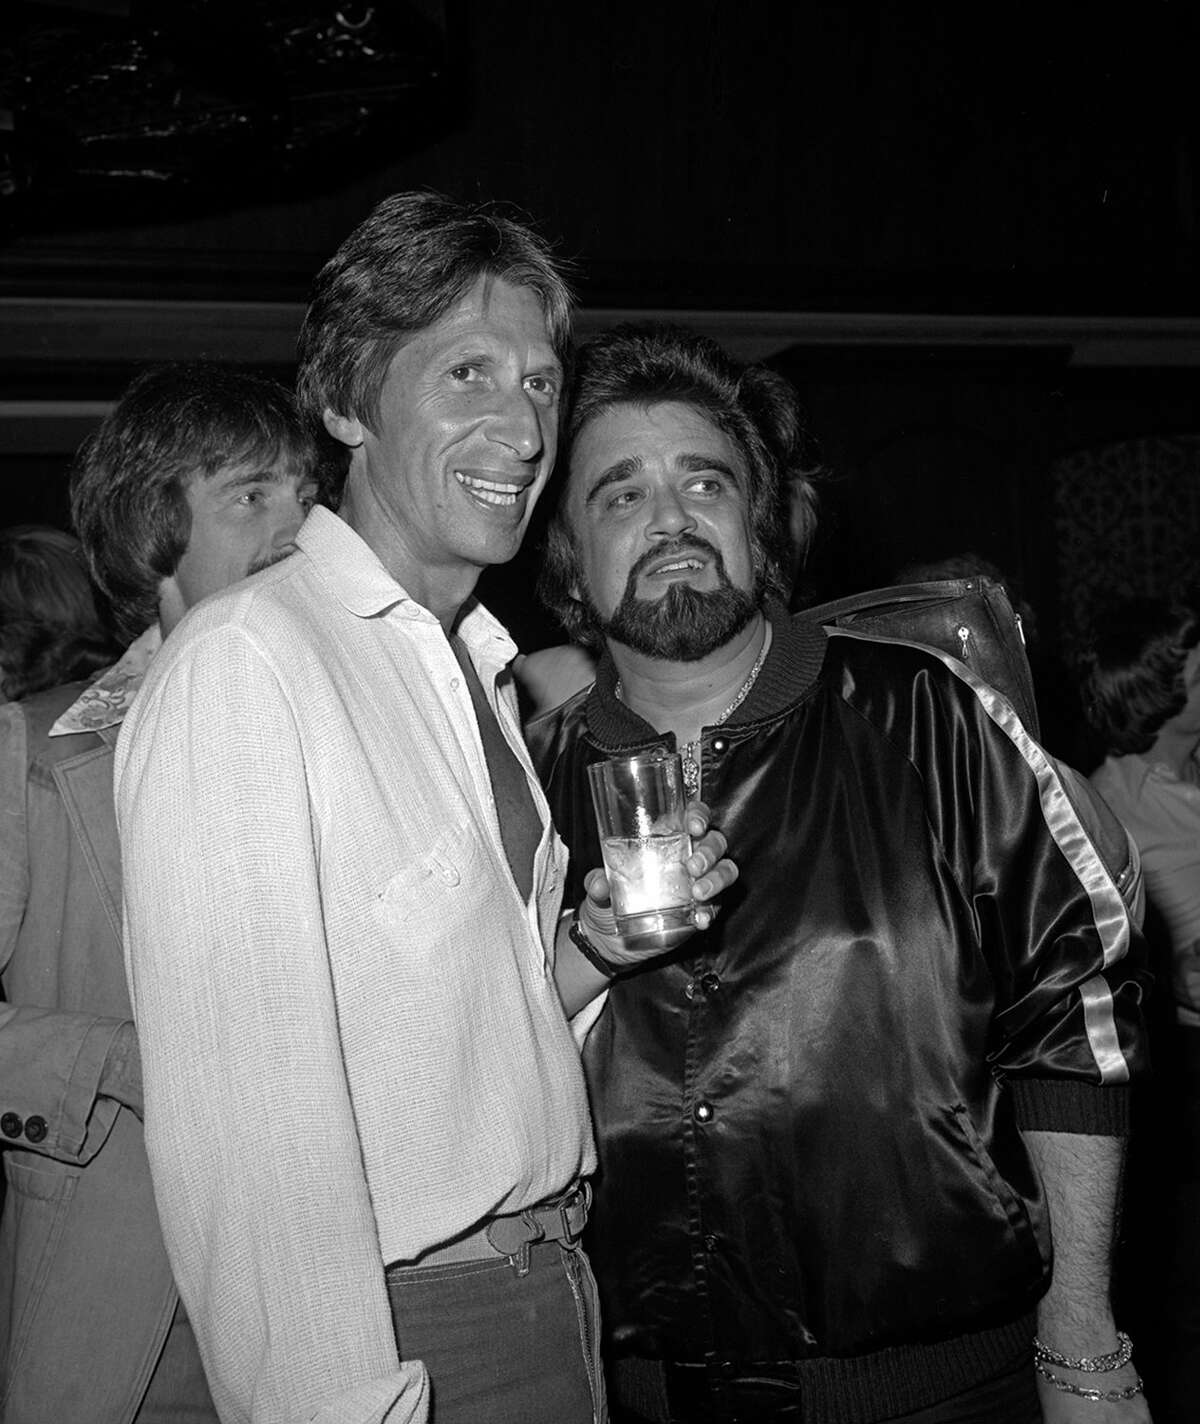 This 1979 photo released by the Las Vegas News Bureau shows David Brenner and Wolfman Jack at the Riviera. A spokesman for the family of the comedian says the "Tonight Show" favorite has died. He was 78. Brenner died Saturday March 15, 2014, at his home in New York City, said Jeff Abraham, who was Brenner's publicist. (AP Photo/ Las Vegas News Bureau)